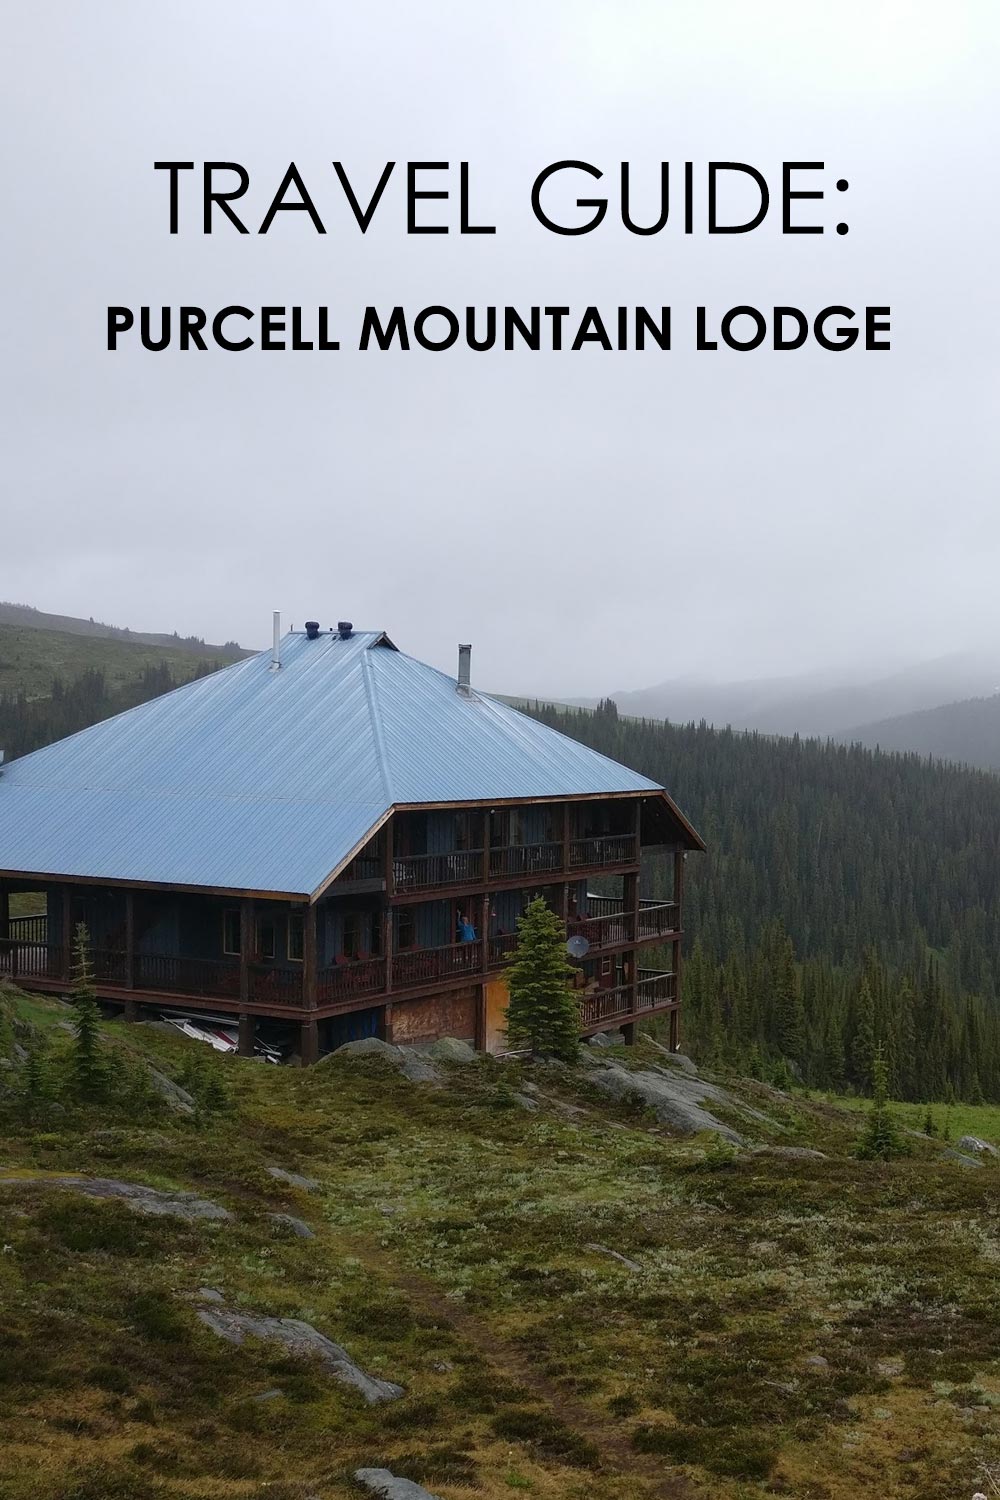 Travel Guide to Purcell Mountain Lodge in BC, Canada - Pinterest